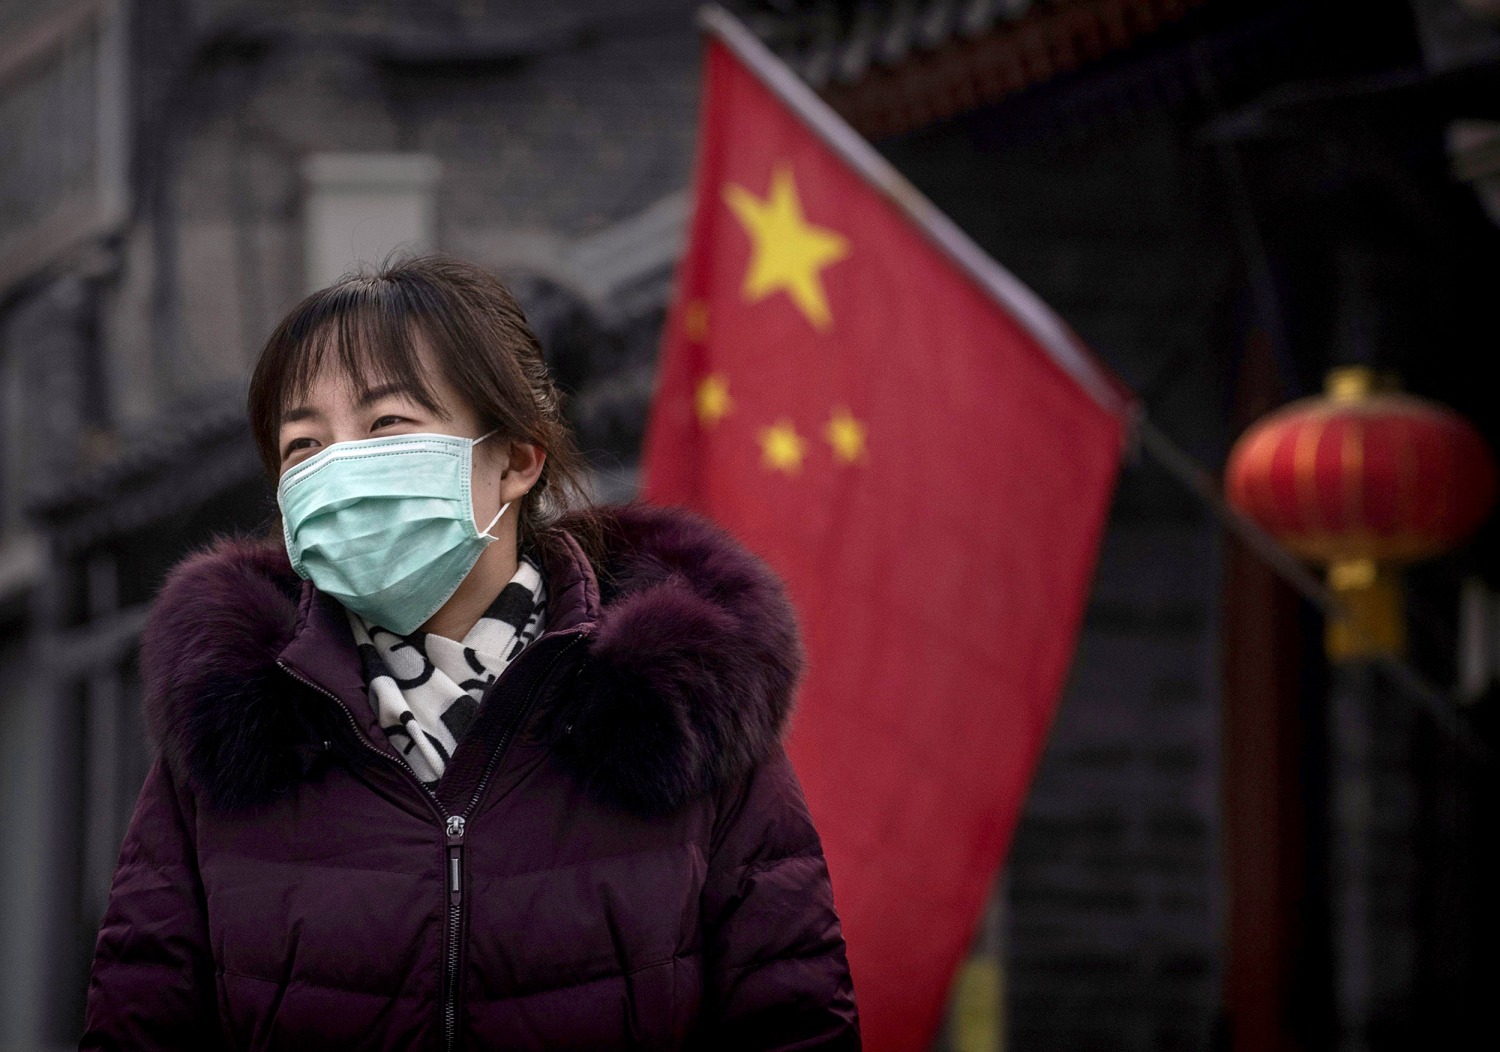 Will coronavirus derail Chinas ability to fulfill Trumps trade deal? pic